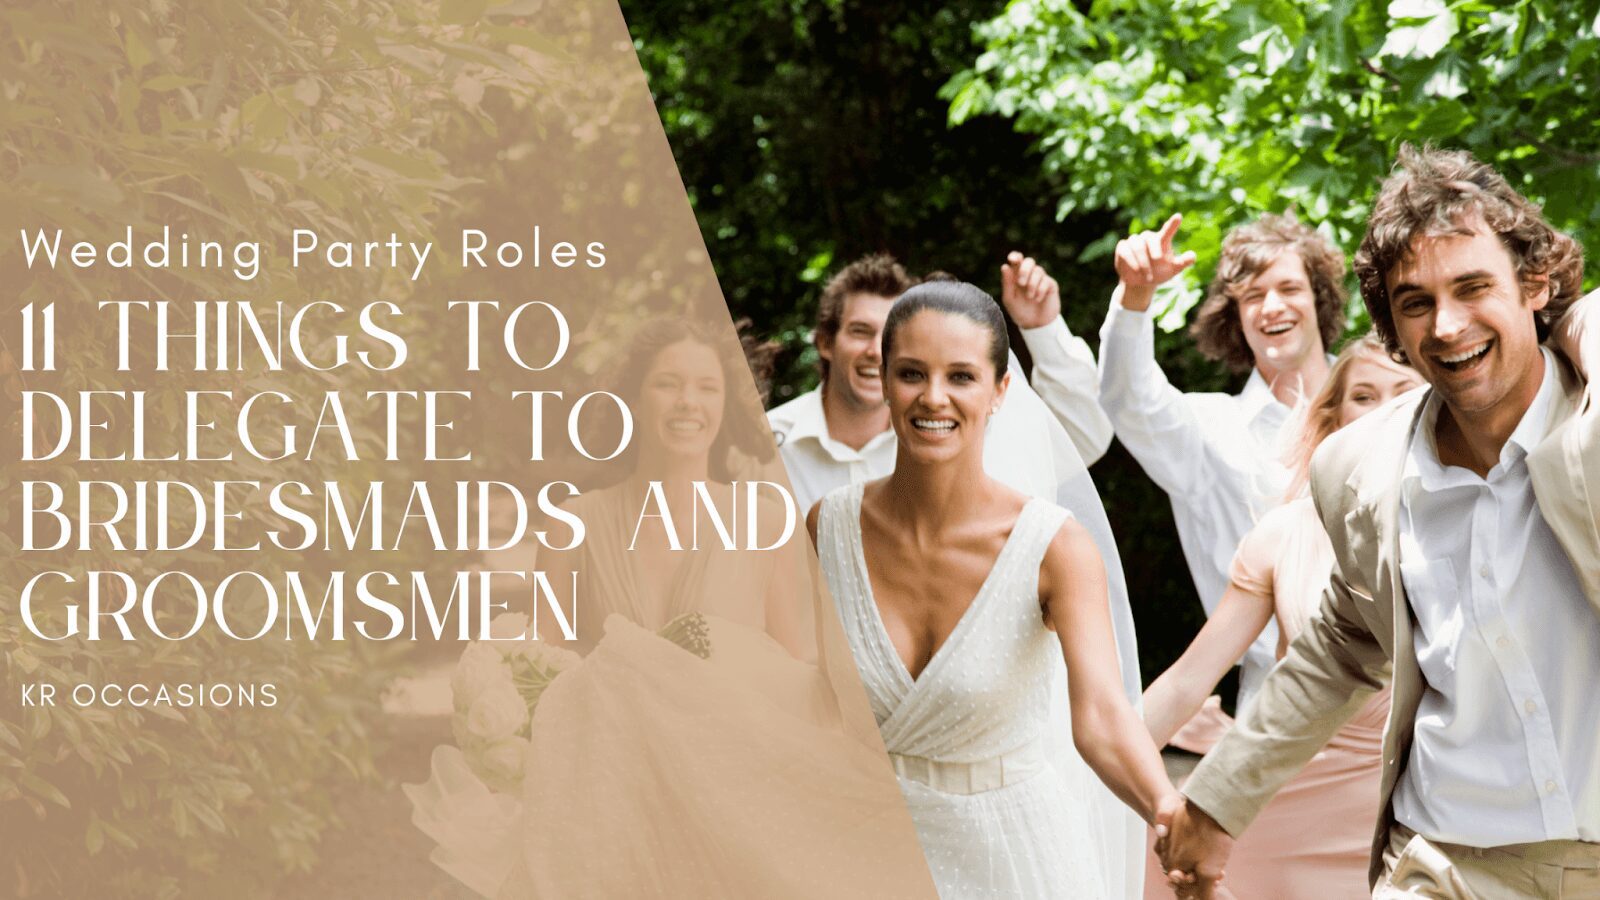 11 Things to Delegate to Bridesmaids and Groomsmen